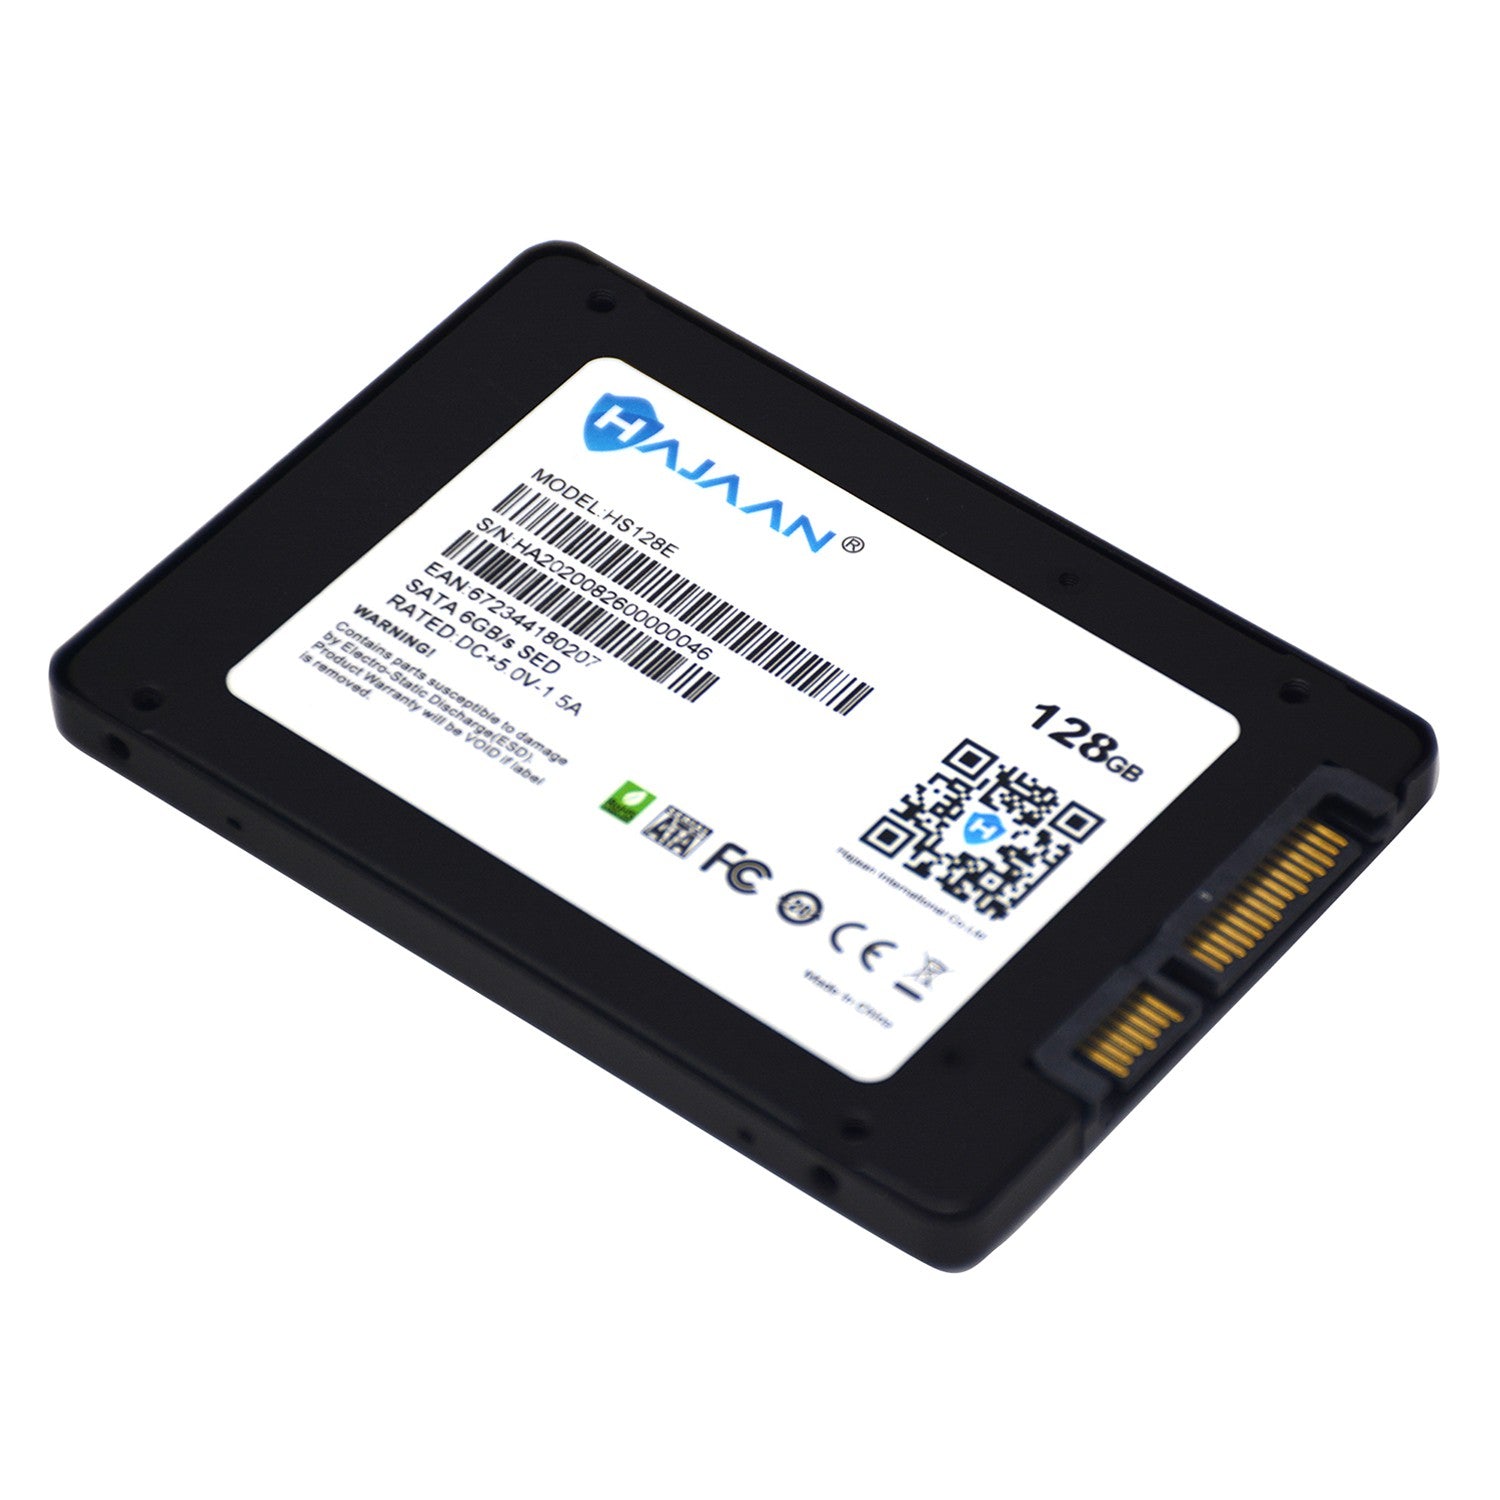 HAJAAN 128GB Internal PC SSD- SATA III 6 Gb/s, 3D NAND TLC, 2.5”, Up to 530MB/s, Internal Solid State Drive for Laptop Tablet PC Desktop-1 Year Warranty